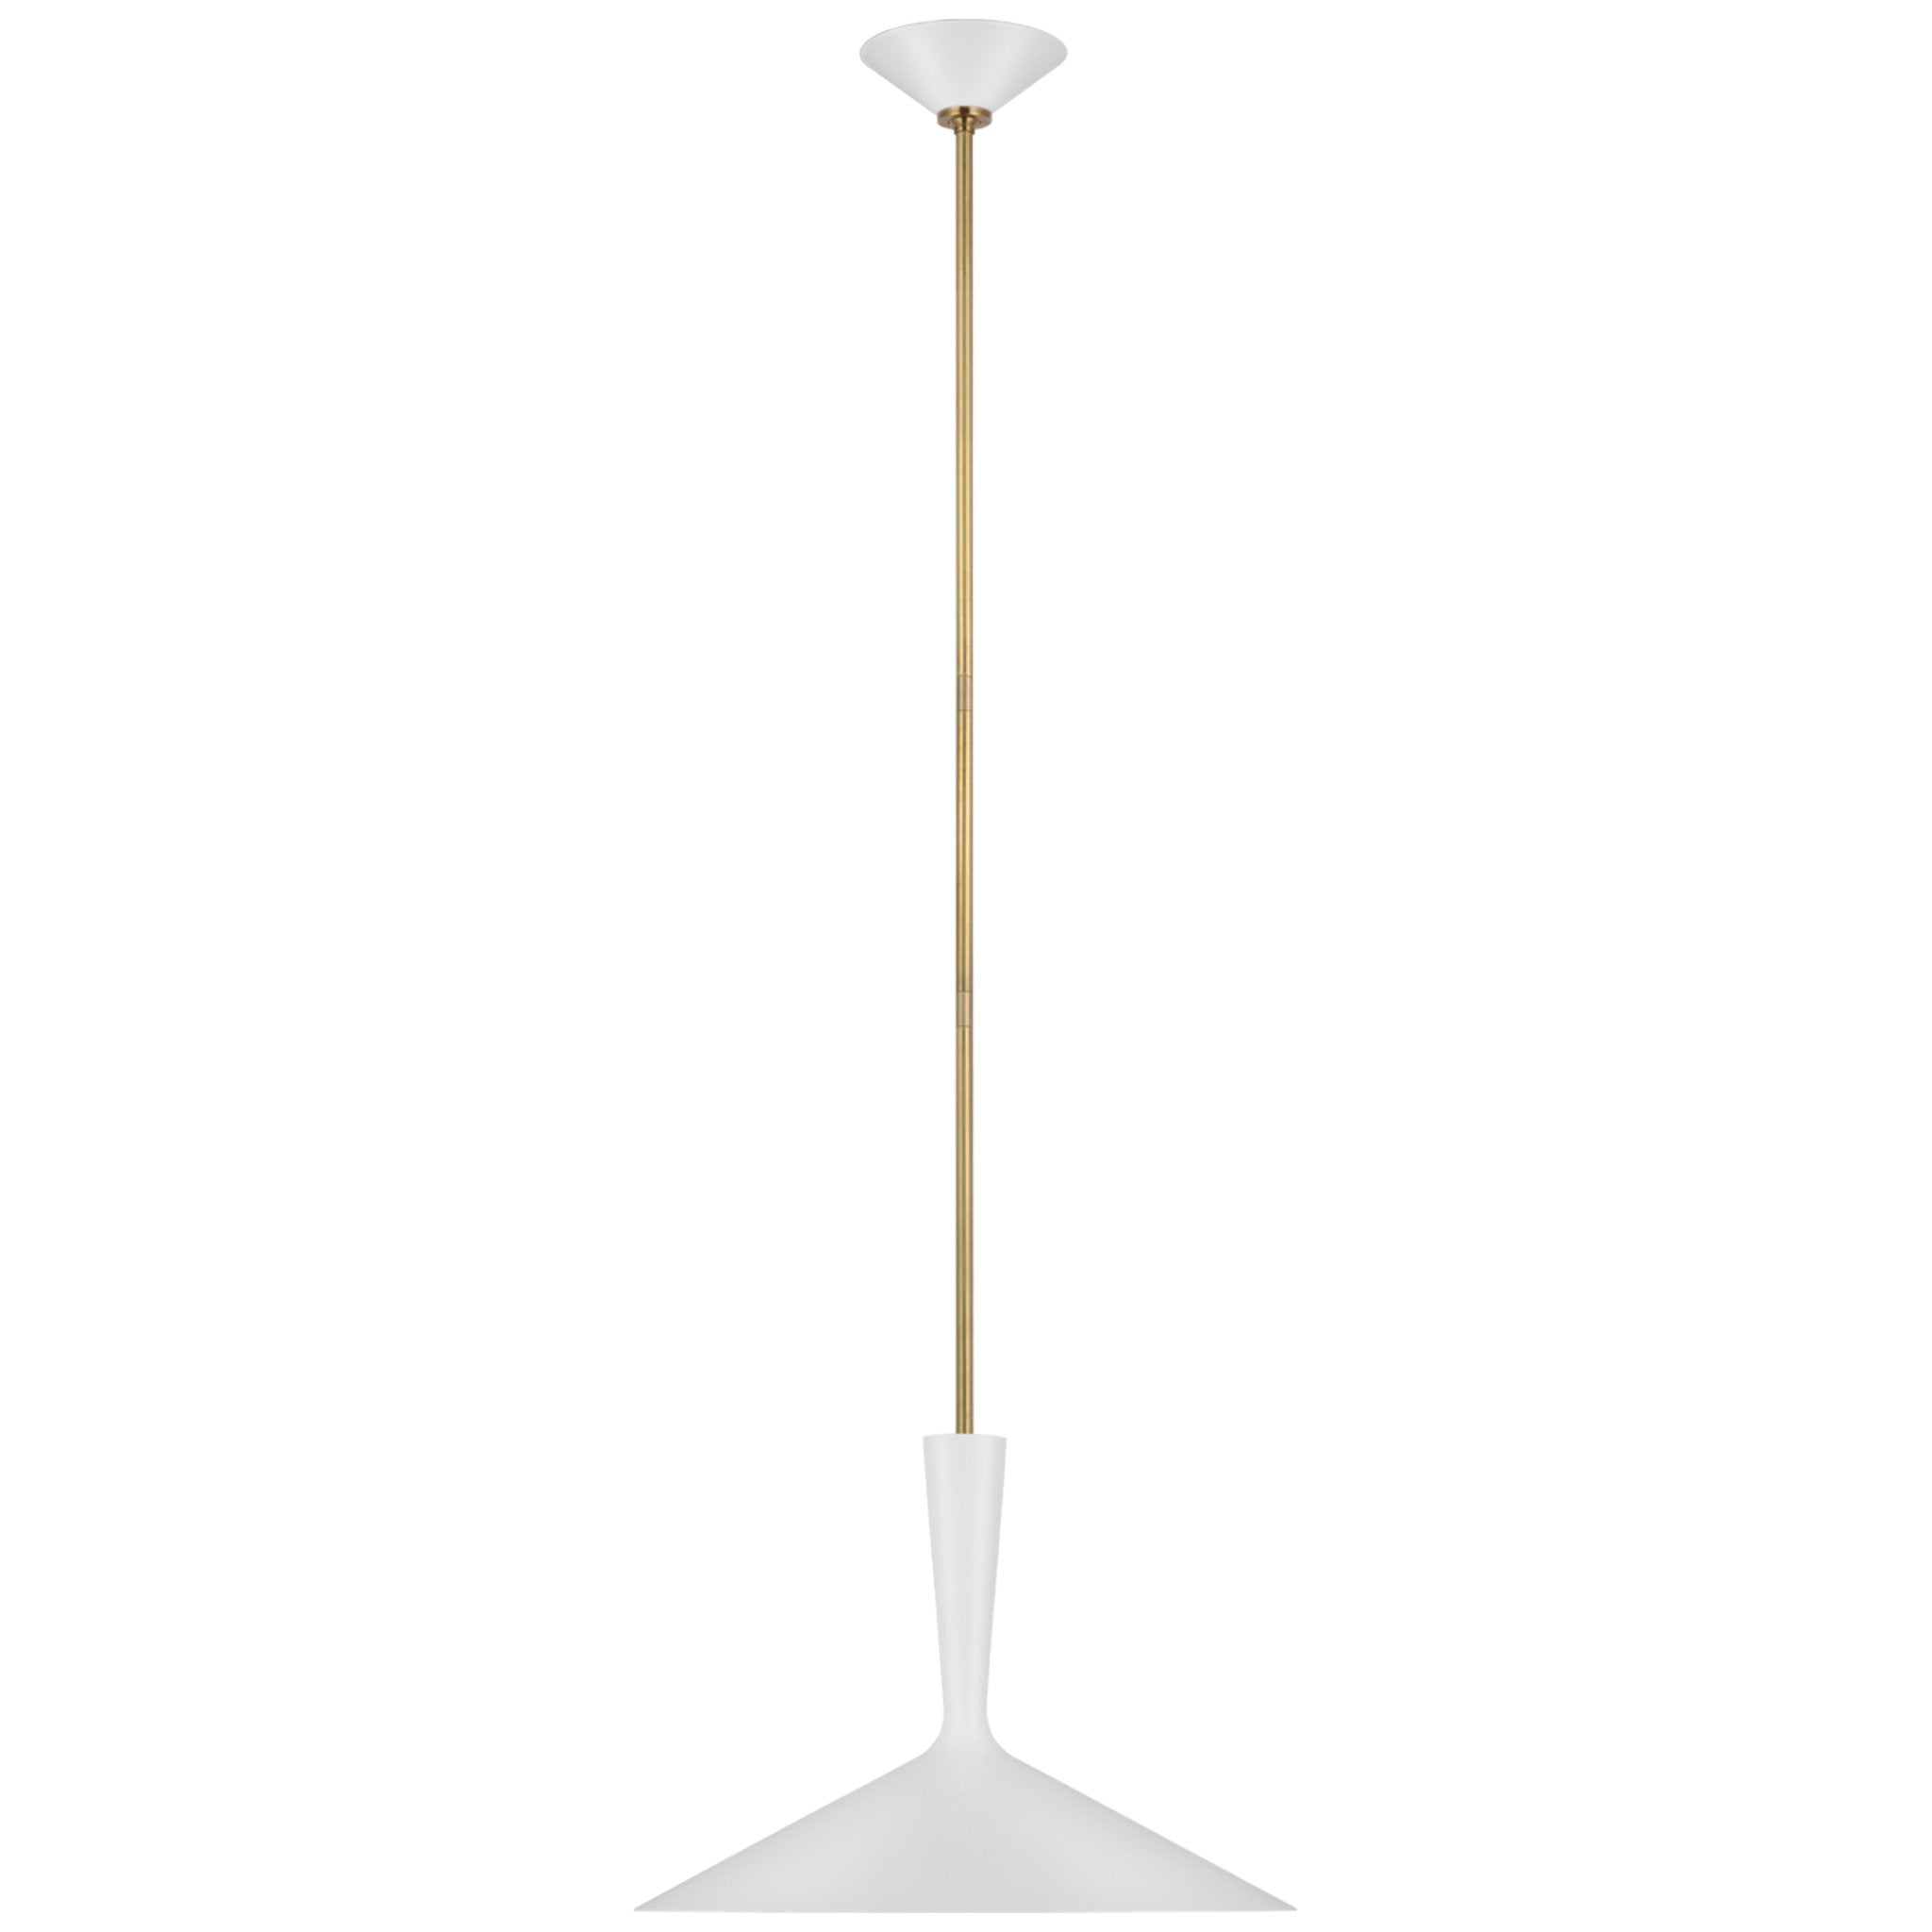 AERIN Rosetta Large Pendant in Matte White and Hand-Rubbed Antique Brass